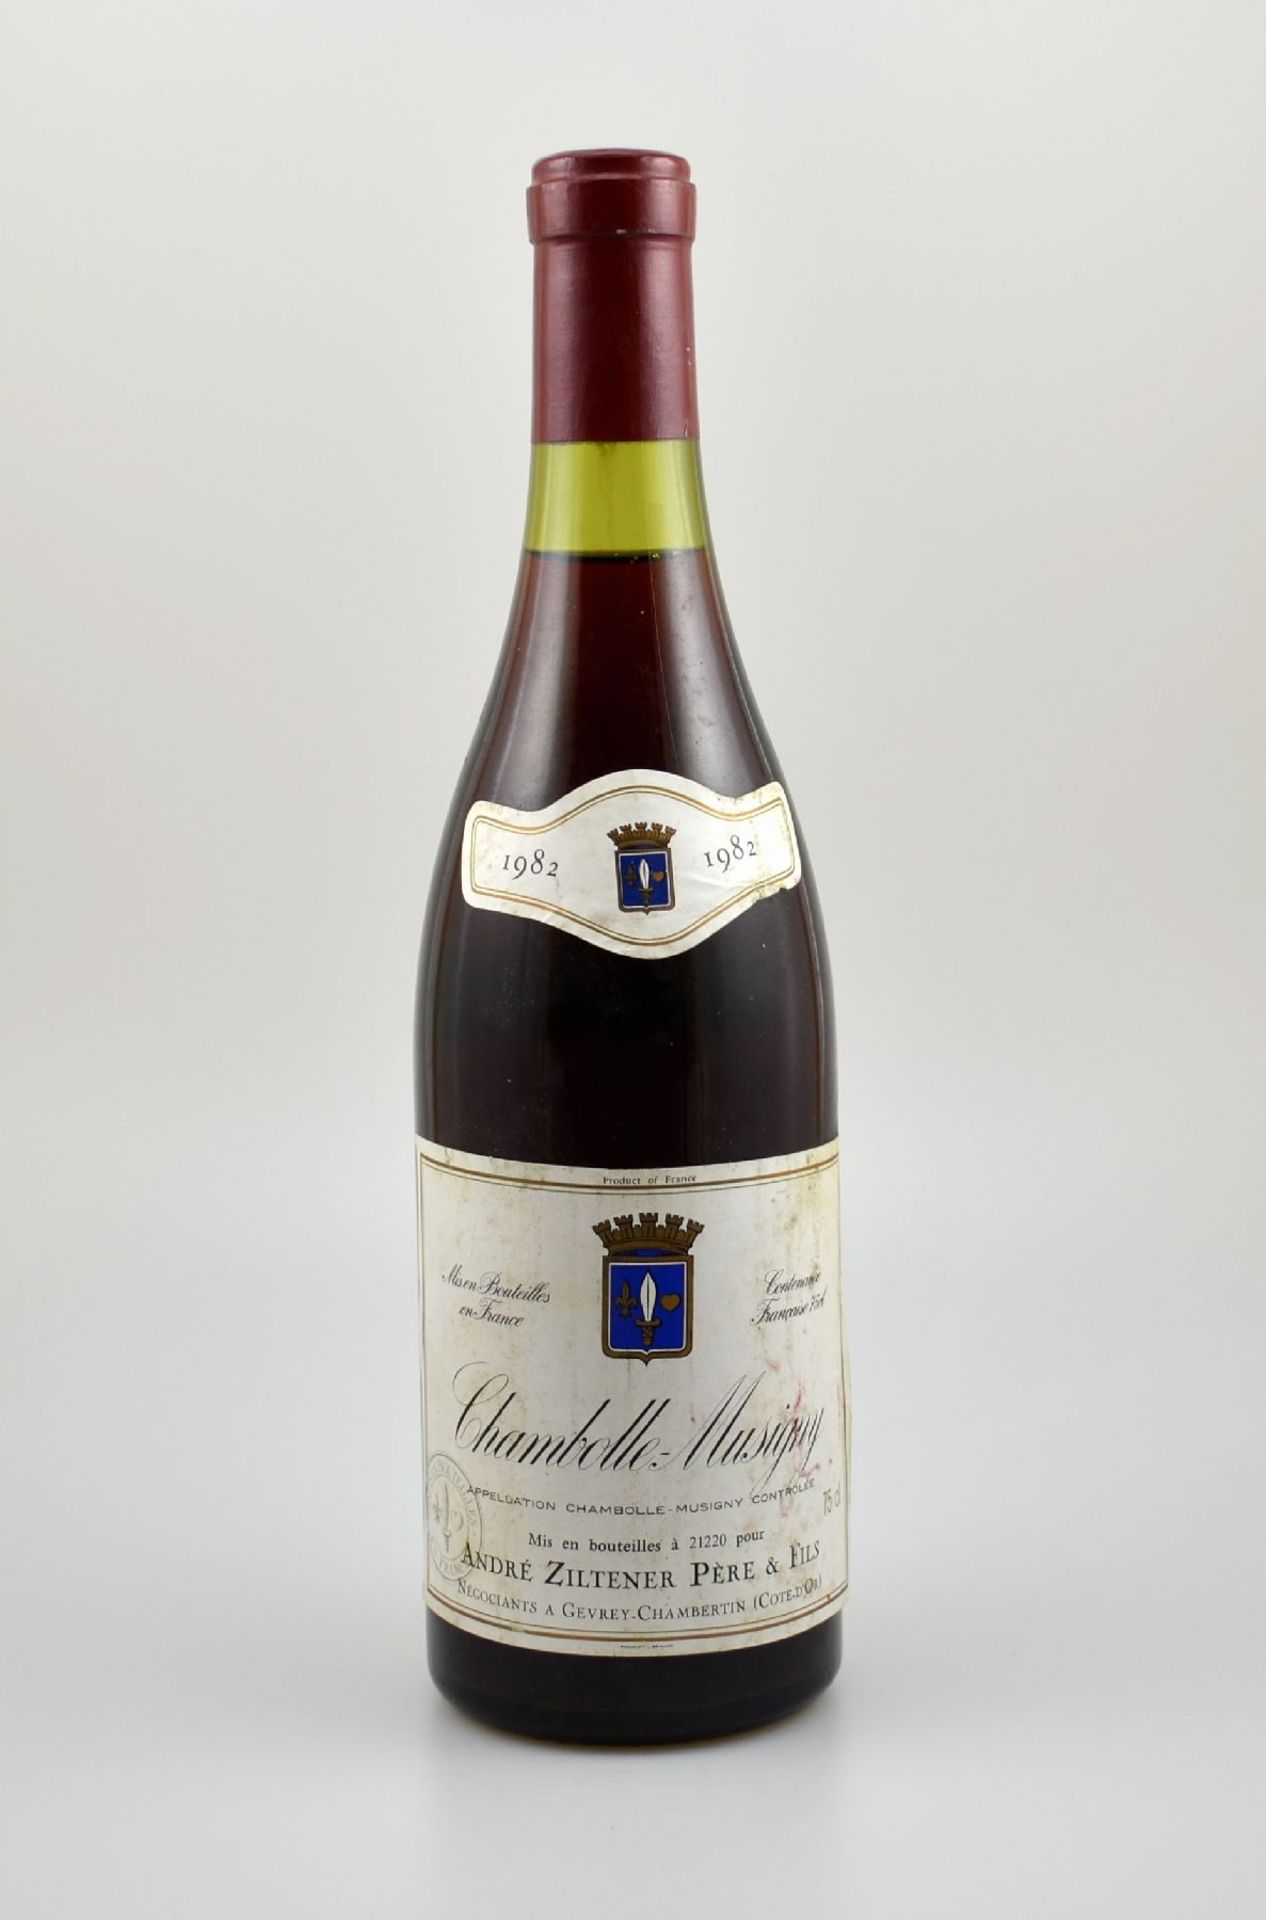 1 Flasche 1982 Chambolle-Musigny, Andre Ziltener Pere & Fils, Cote-D'Or, ca. 75 cl, Abstand zwischen